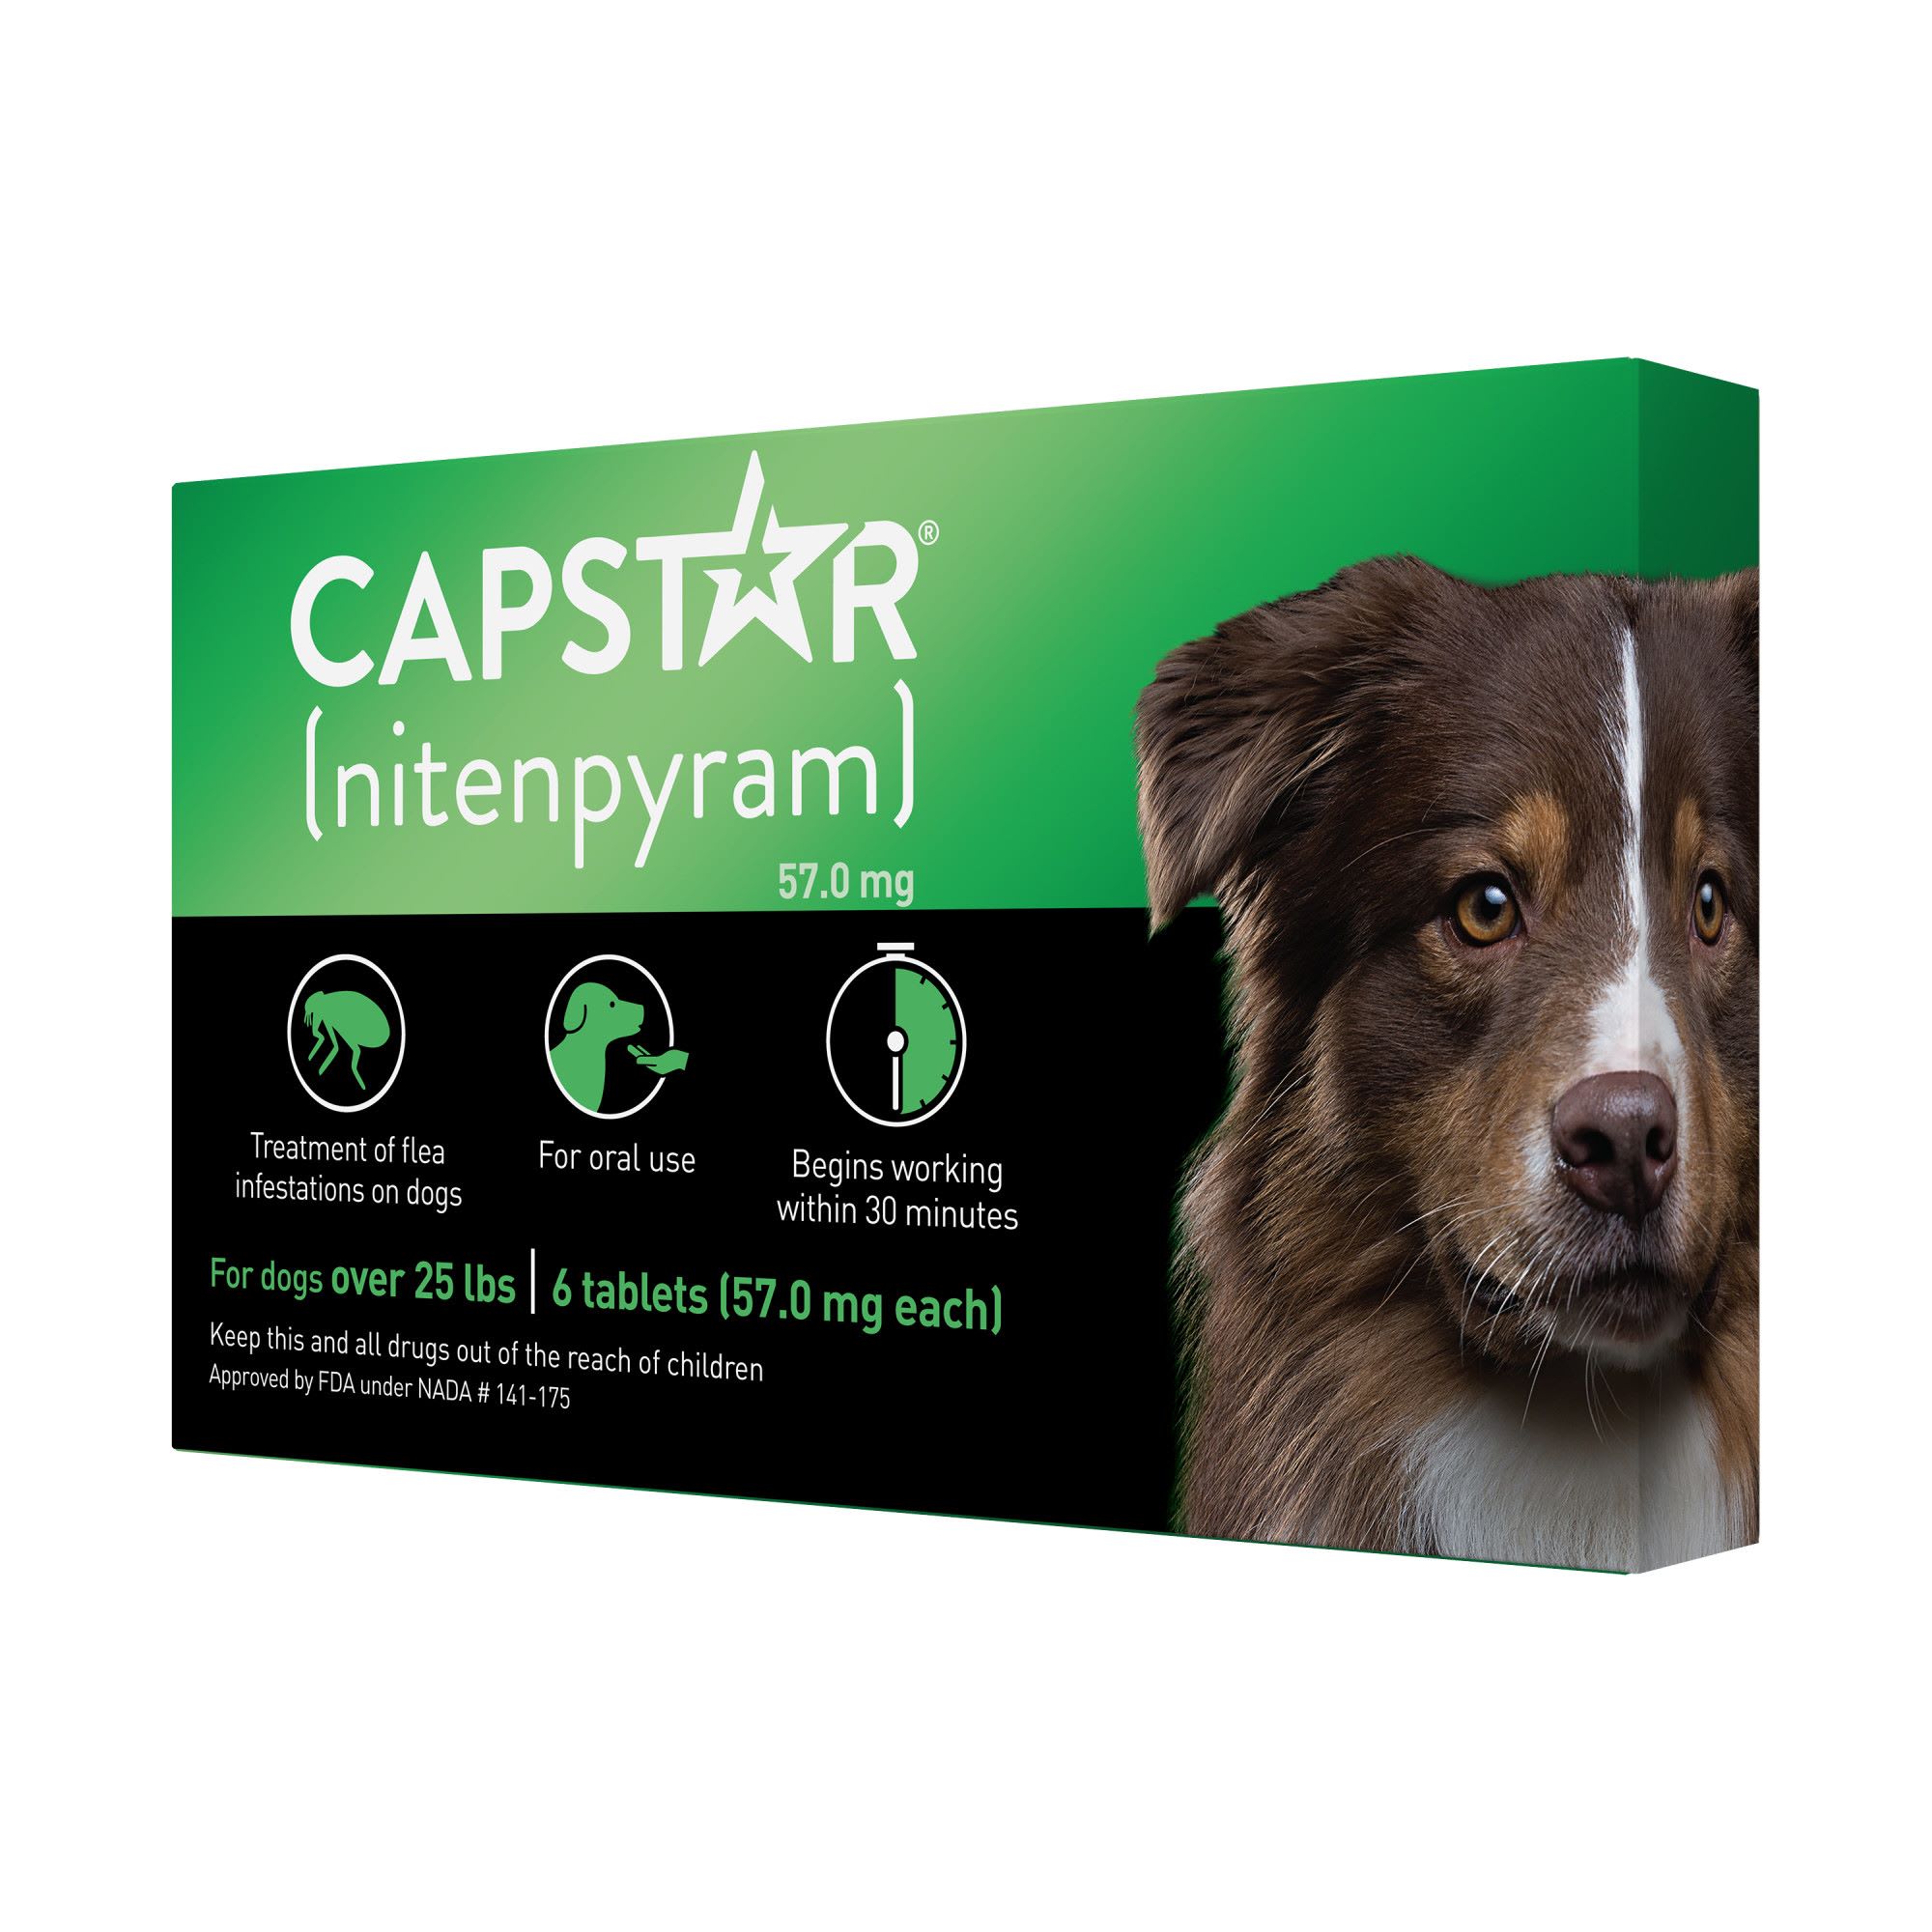 Capstar Flea Tablets for Dogs over 25 